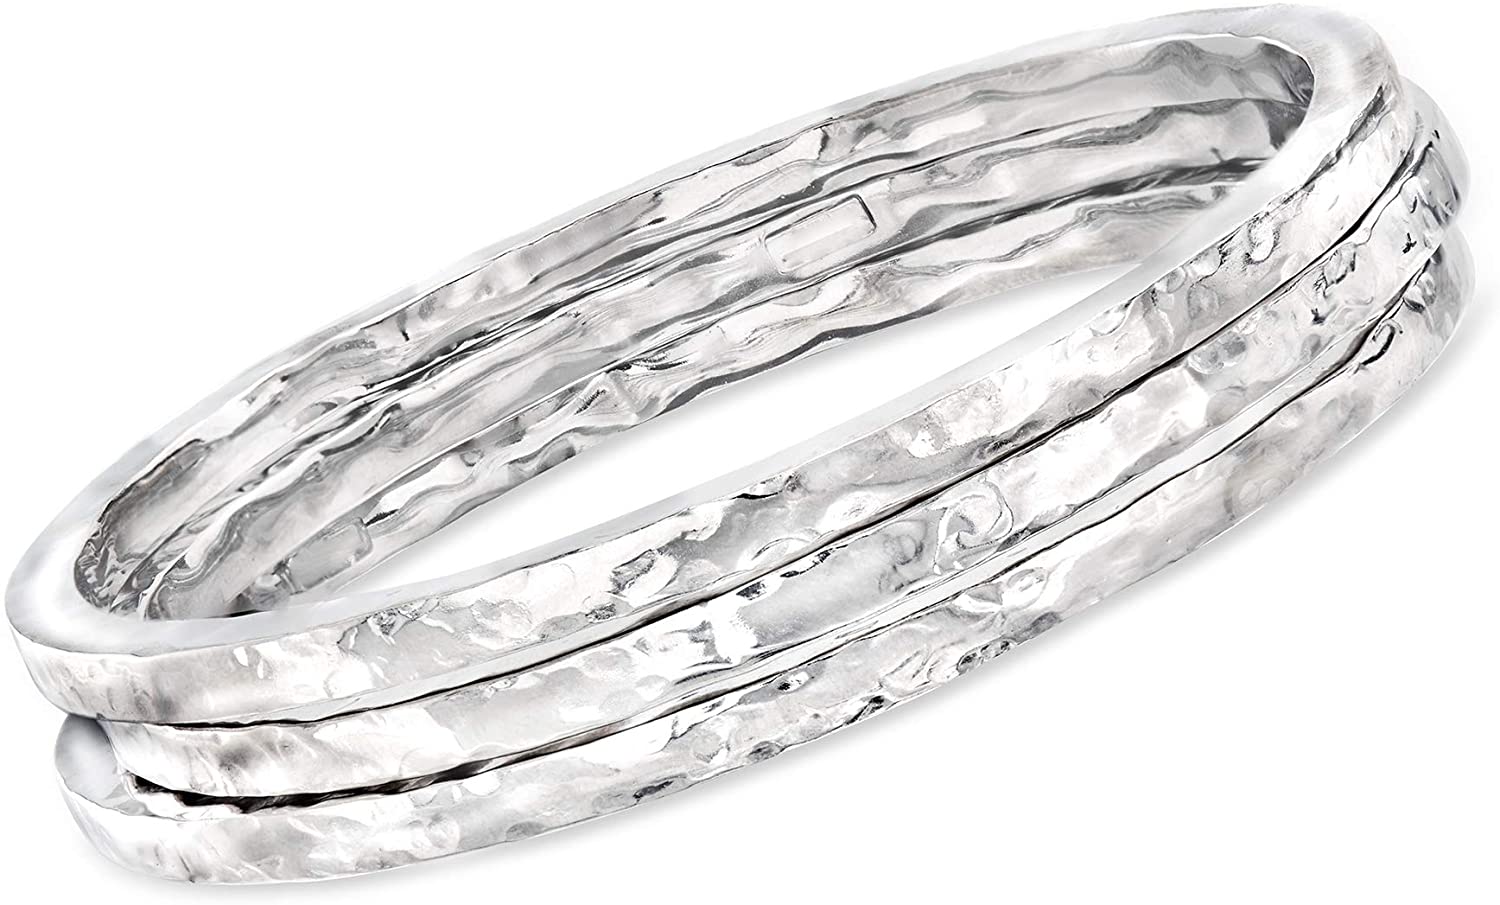 Ross-Simons Italian Sterling Silver Jewelry Set: 3 Hammered Bangle Bracelets. 7.5 inches